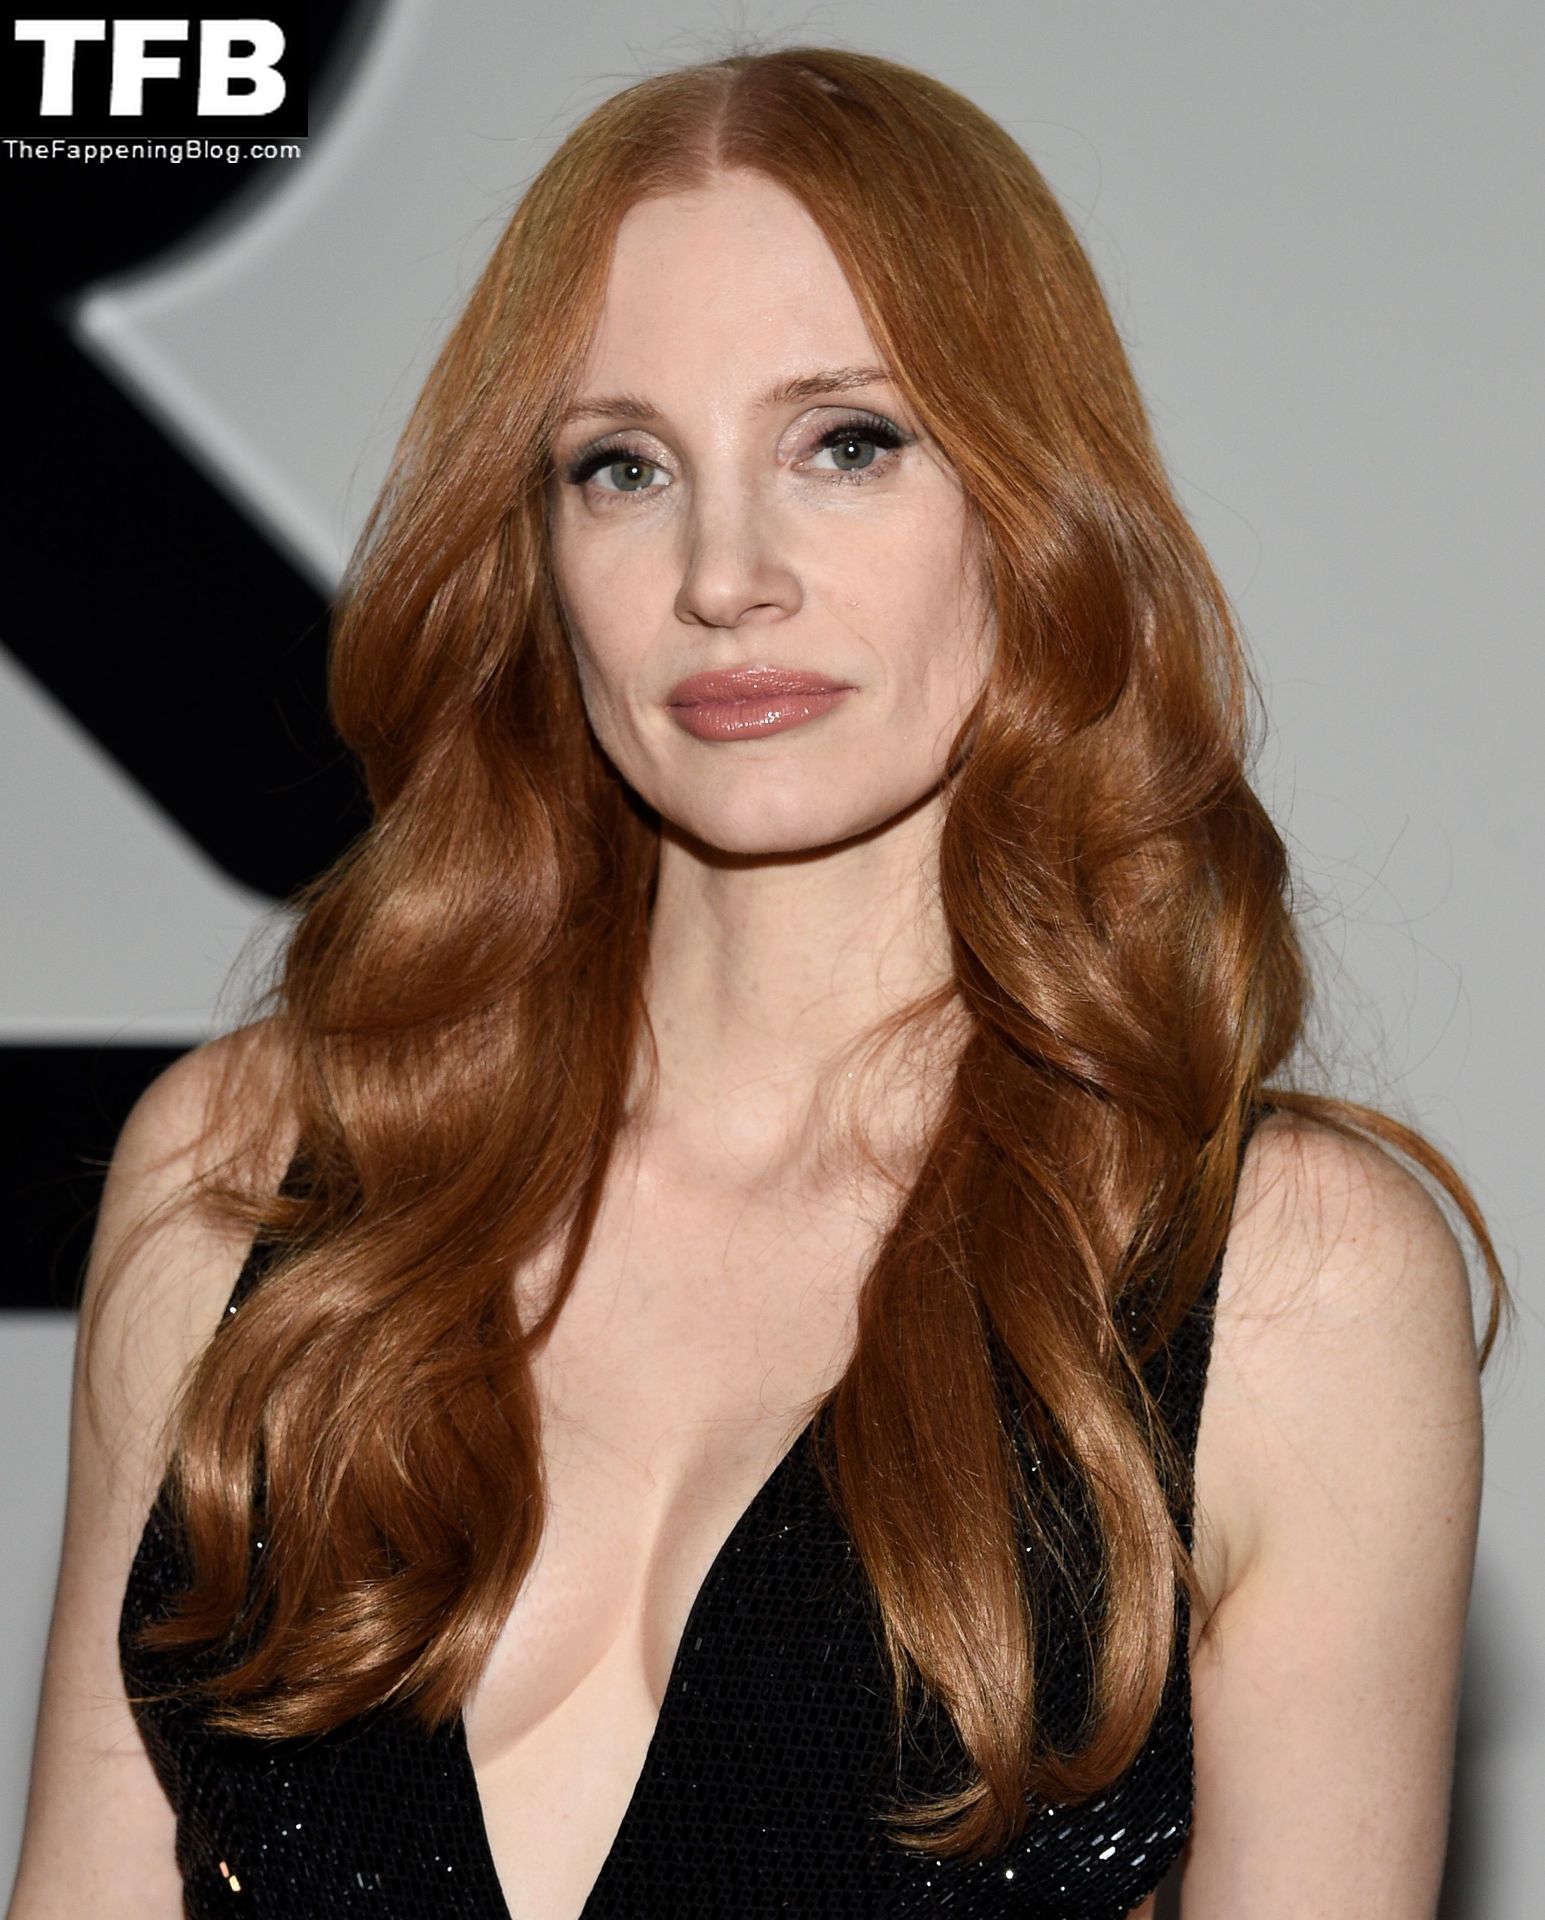 Jessica-Chastain-Sexy-The-Fappening-Blog-61.jpg